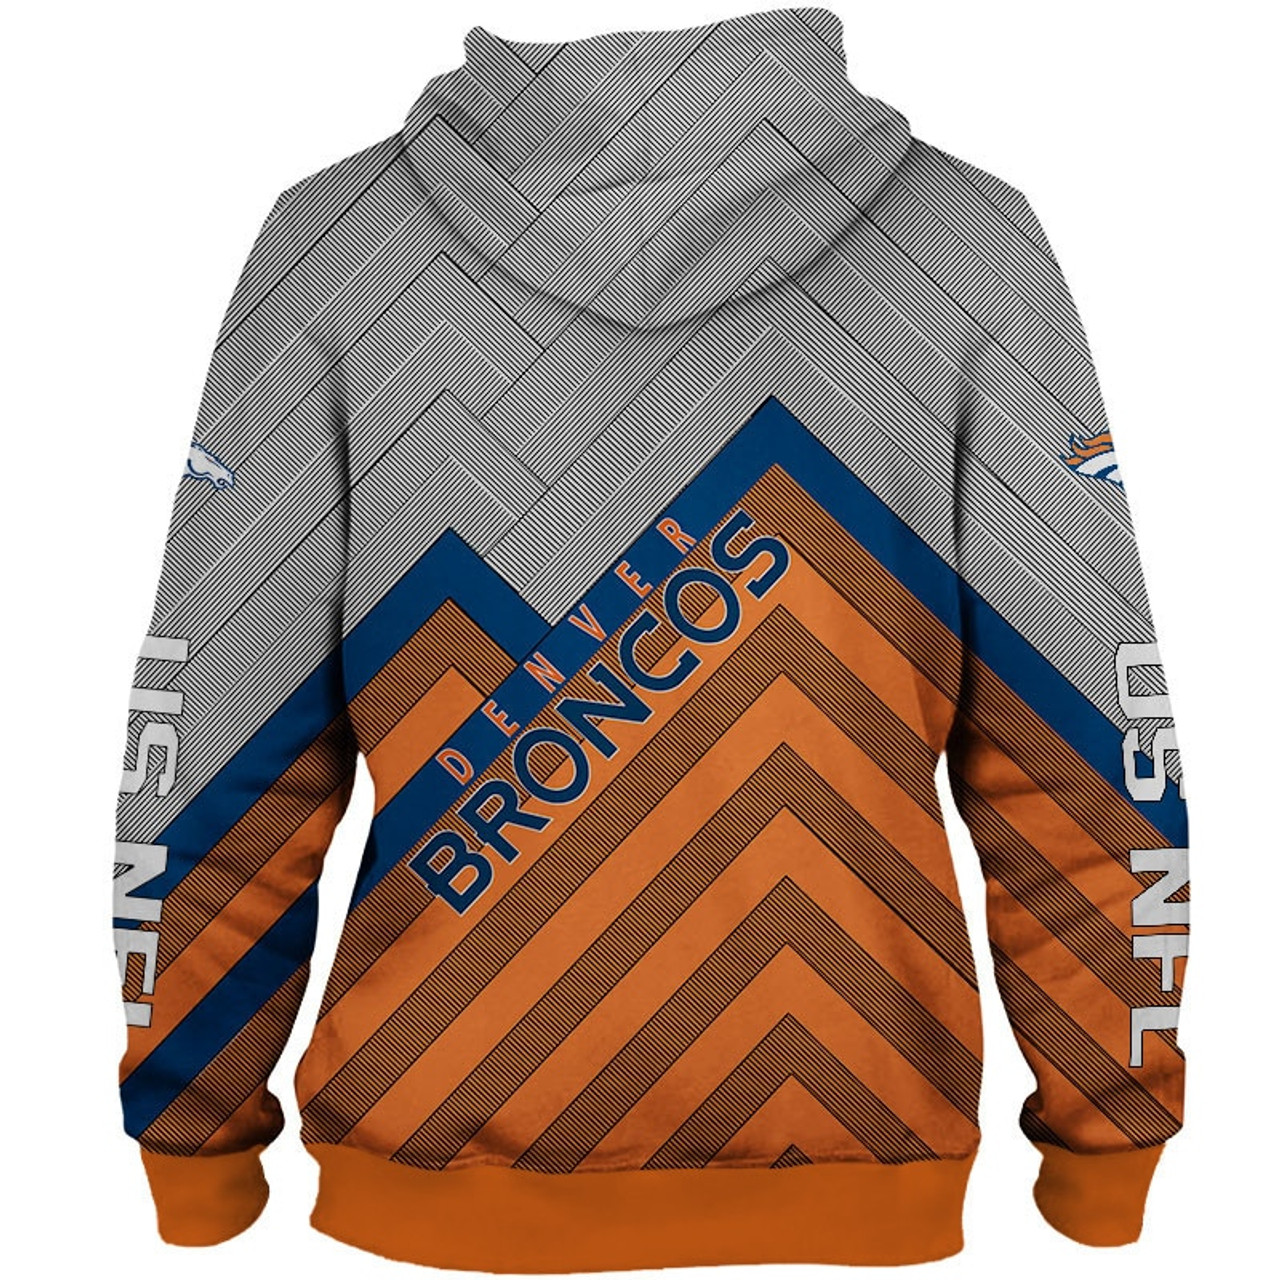  **(NEW-OFFICIAL-N.F.L.DENVER-BRONCOS-PULLOVER-HOODIES/3D-CUSTOM-DENVERS-LOGOS & OFFICIAL-BRONCOS-TEAM-COLORS/NICE-3D-DETAILED-GRAPHIC-PRINTED-DOUBLE-SIDED/ALL-OVER-ENTIRE-HOODIE-PRINTED-DESIGN/TRENDY-WARM-PREMIUM-BRONCOS-PULLOVER-HOODIES)**